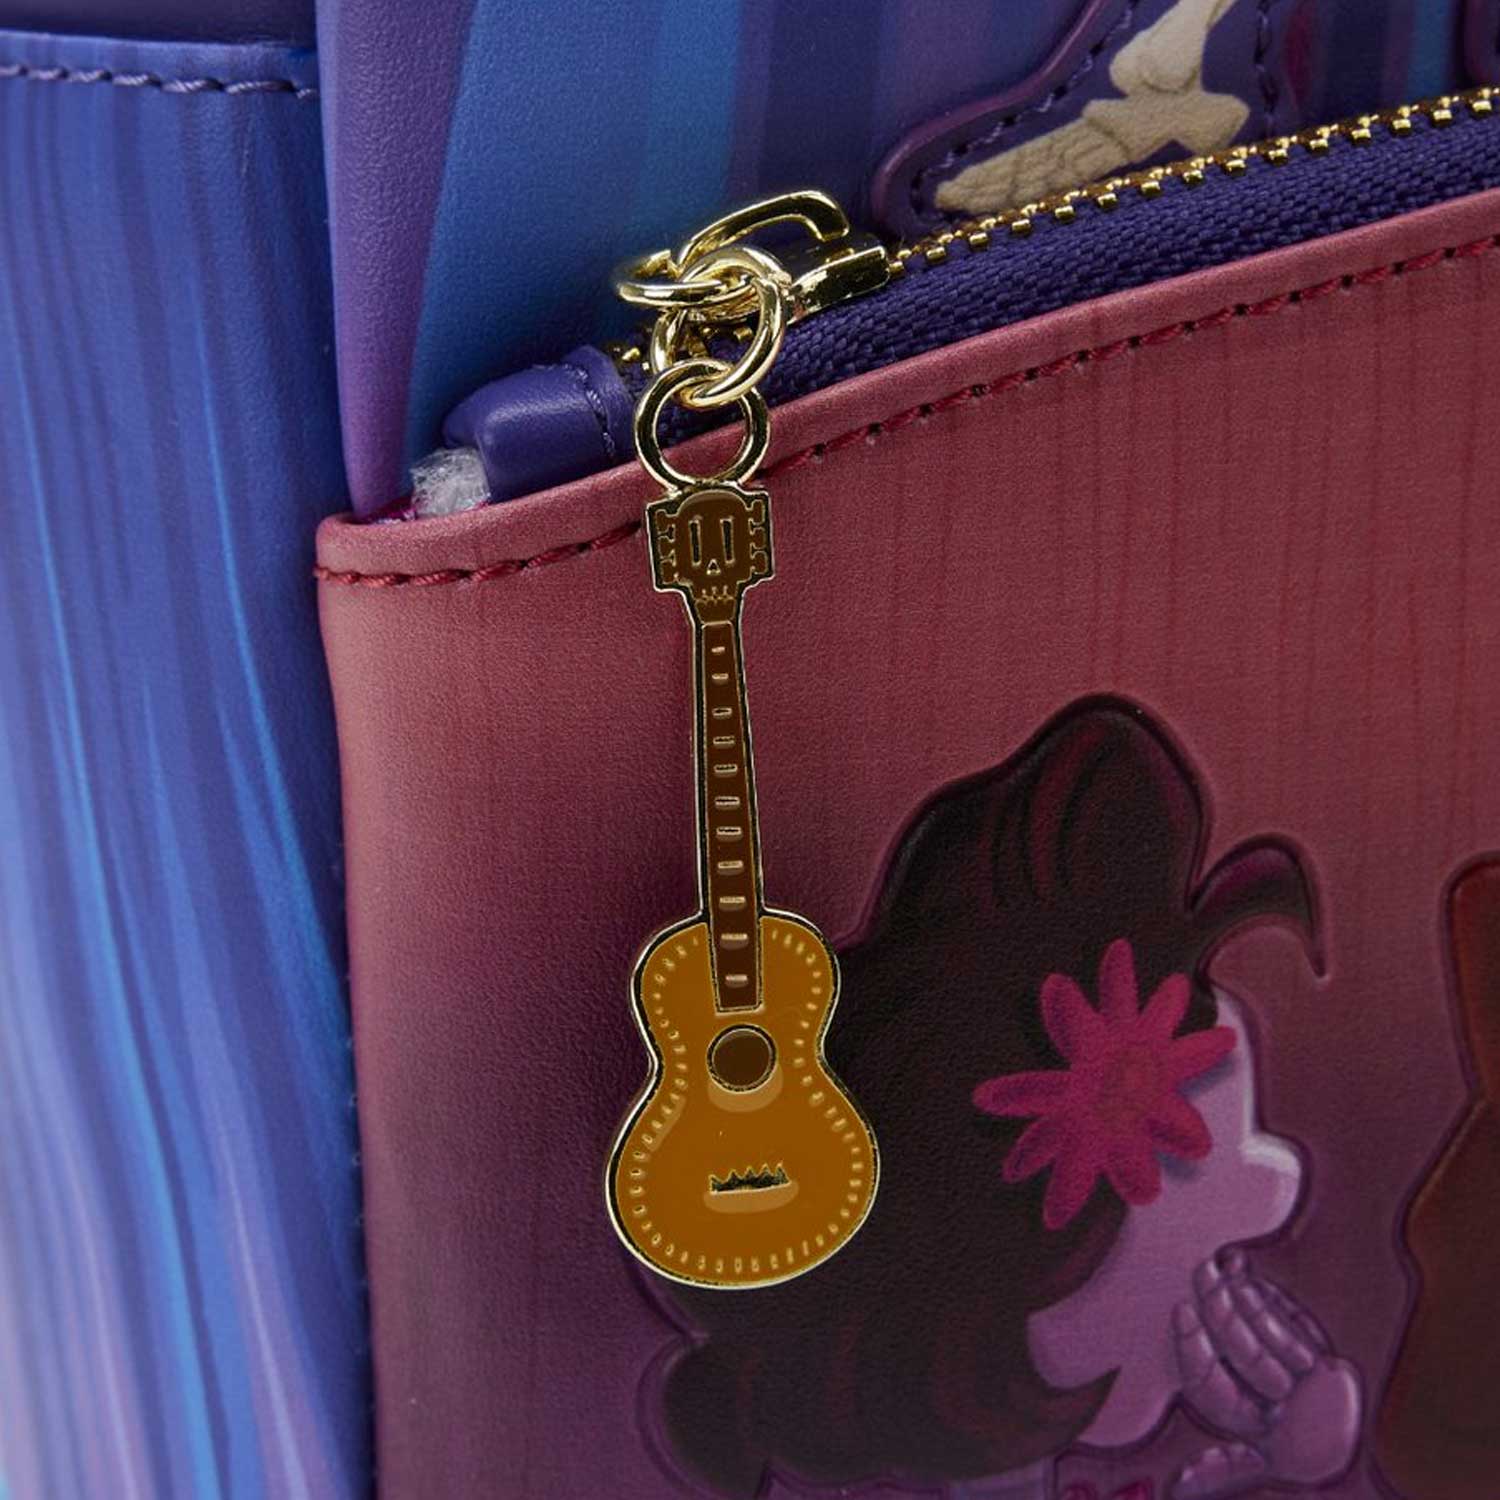 Loungefly x Pixar Coco Miguel and Hector Performance Mini Backpack